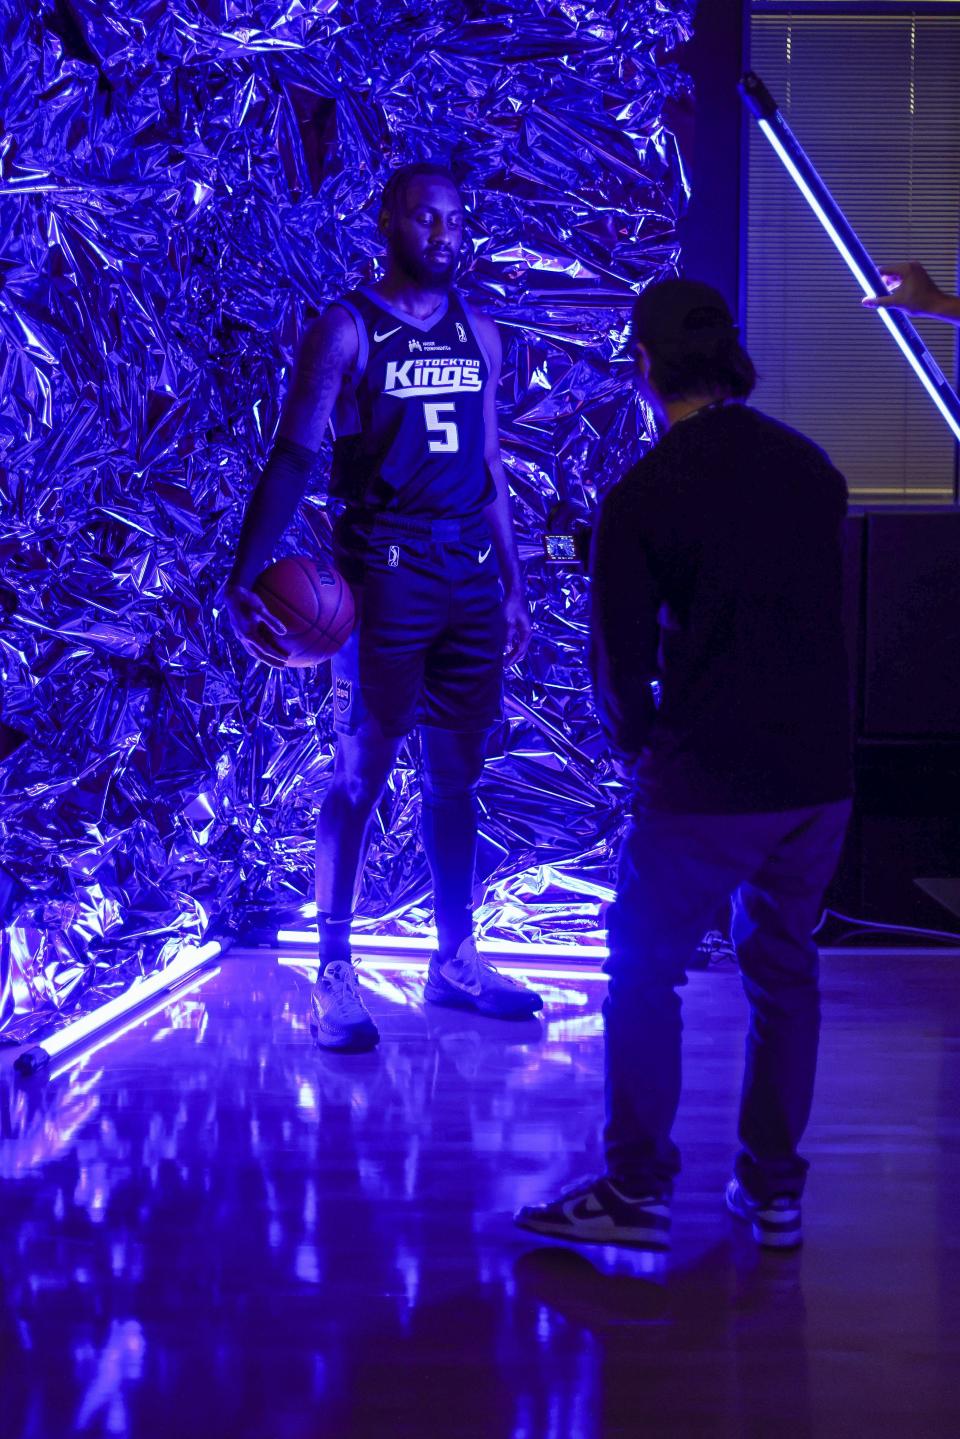 Stockton Kings media team members work on graphics for the upcoming season with G/F Jaylen Nowell during the Stockton Kings annual Media day at their practice facility in Sacramento, CA